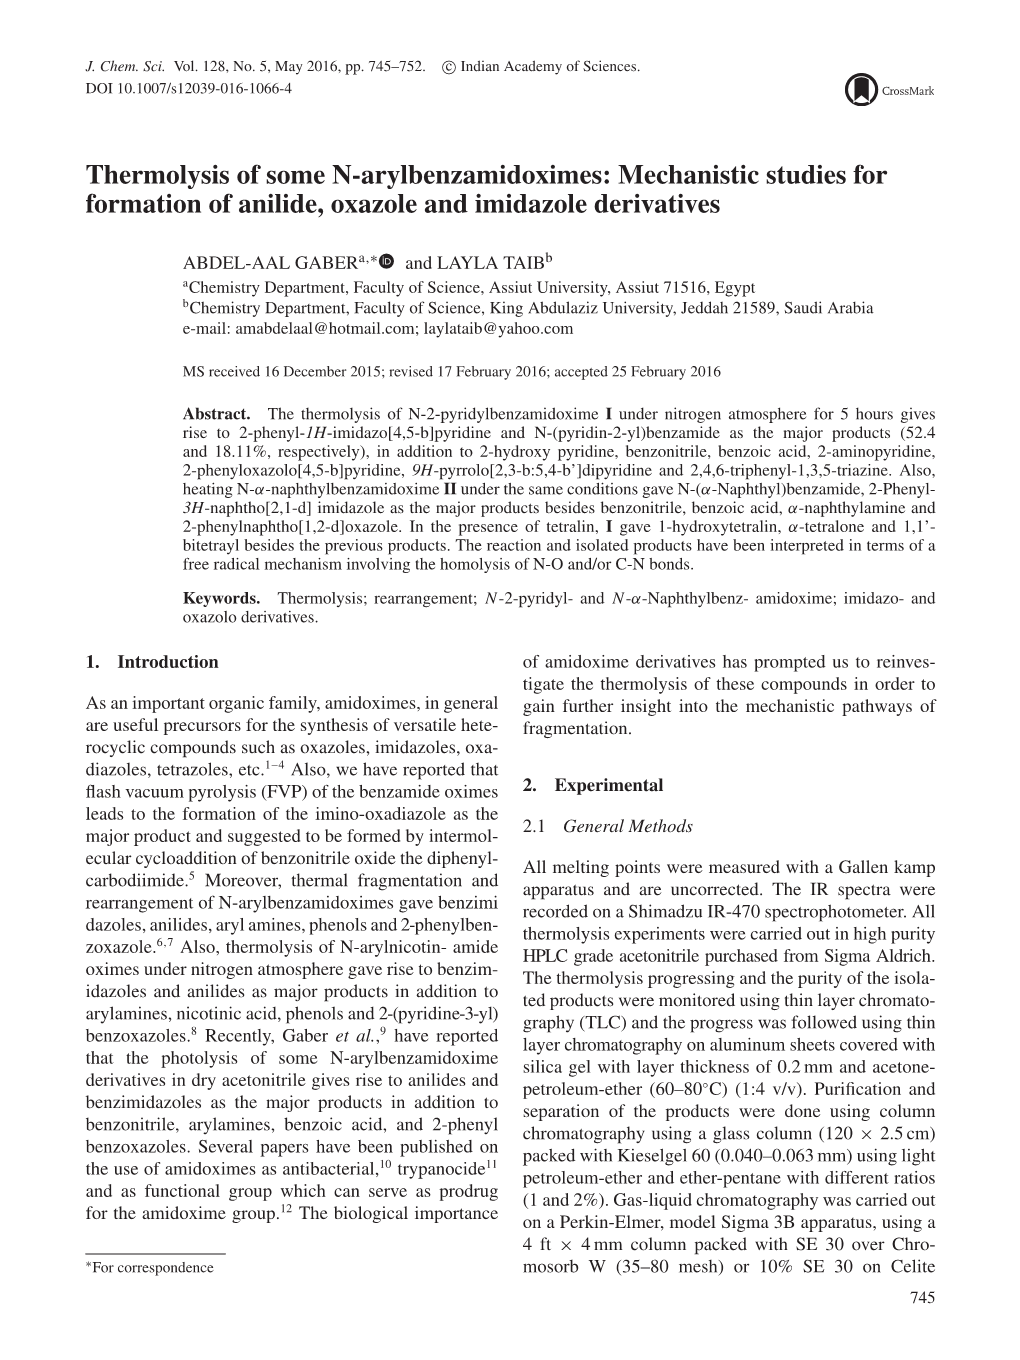 Mechanistic Studies for Formation of Anilide, Oxazole and Imidazole Derivatives